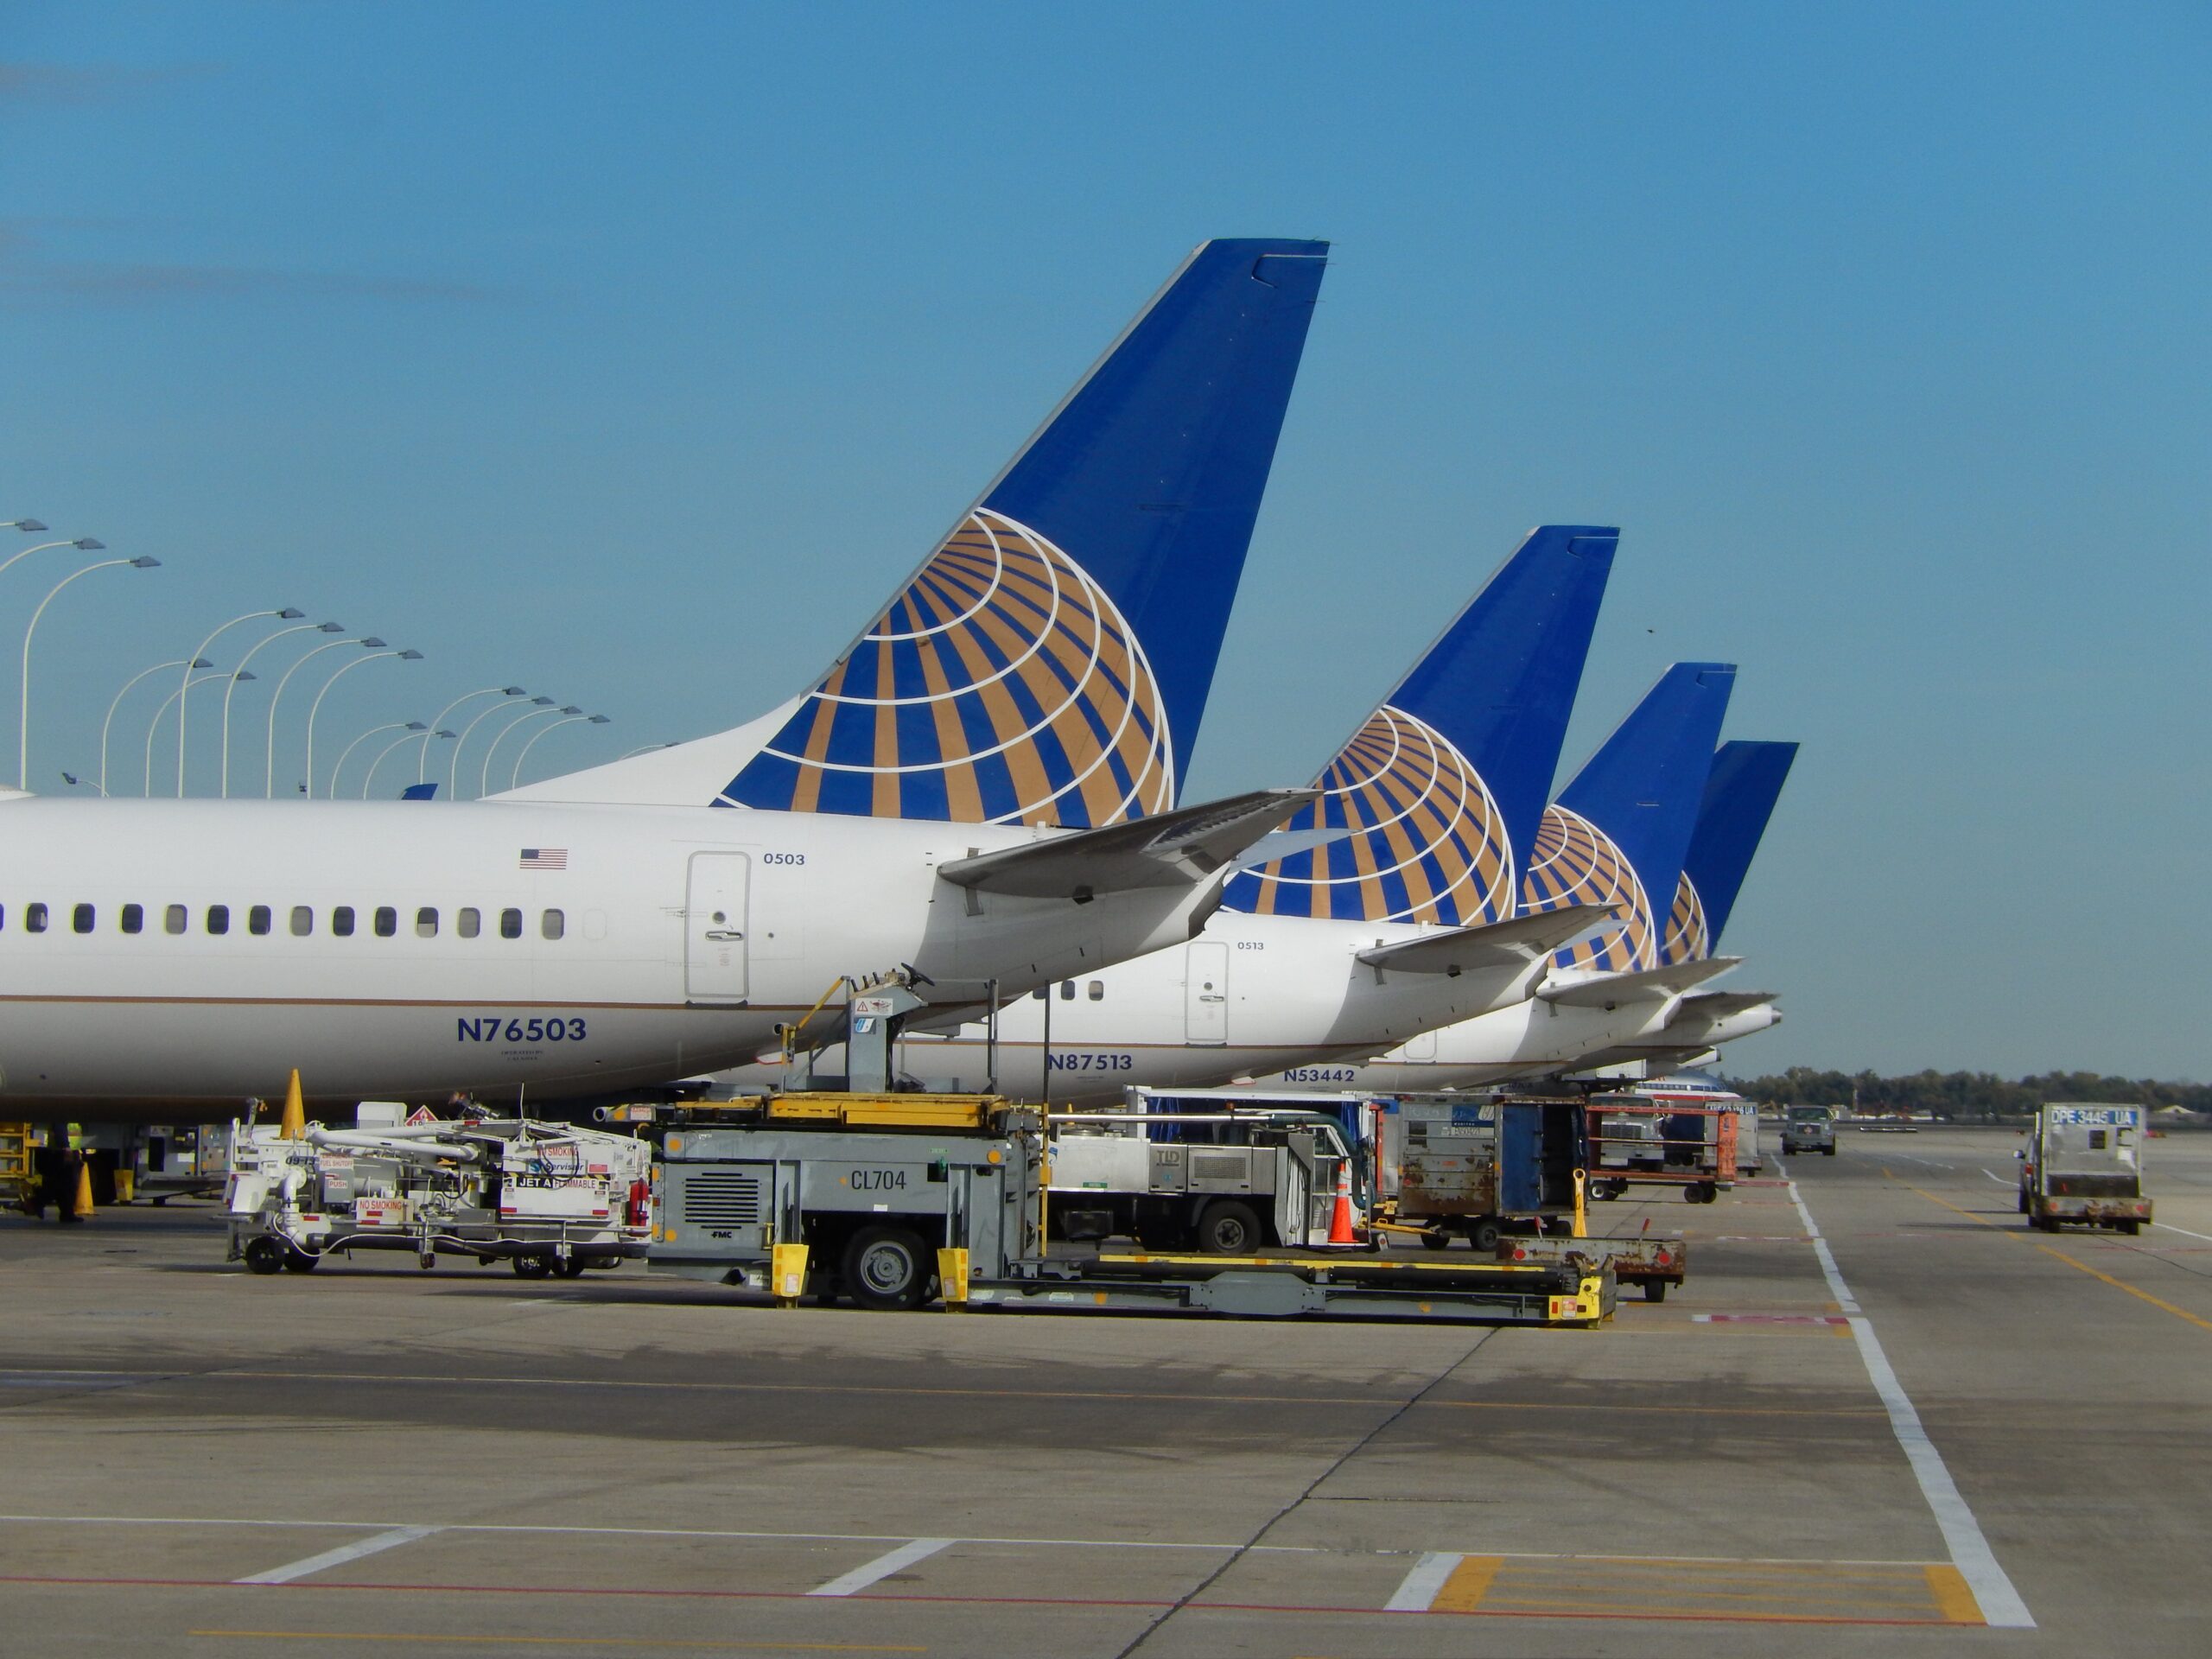 [FILE] United Airlines jets are parked at the terminal at O'Hare International Airport in Chicago, Illinois on Oct. 25, 2013.